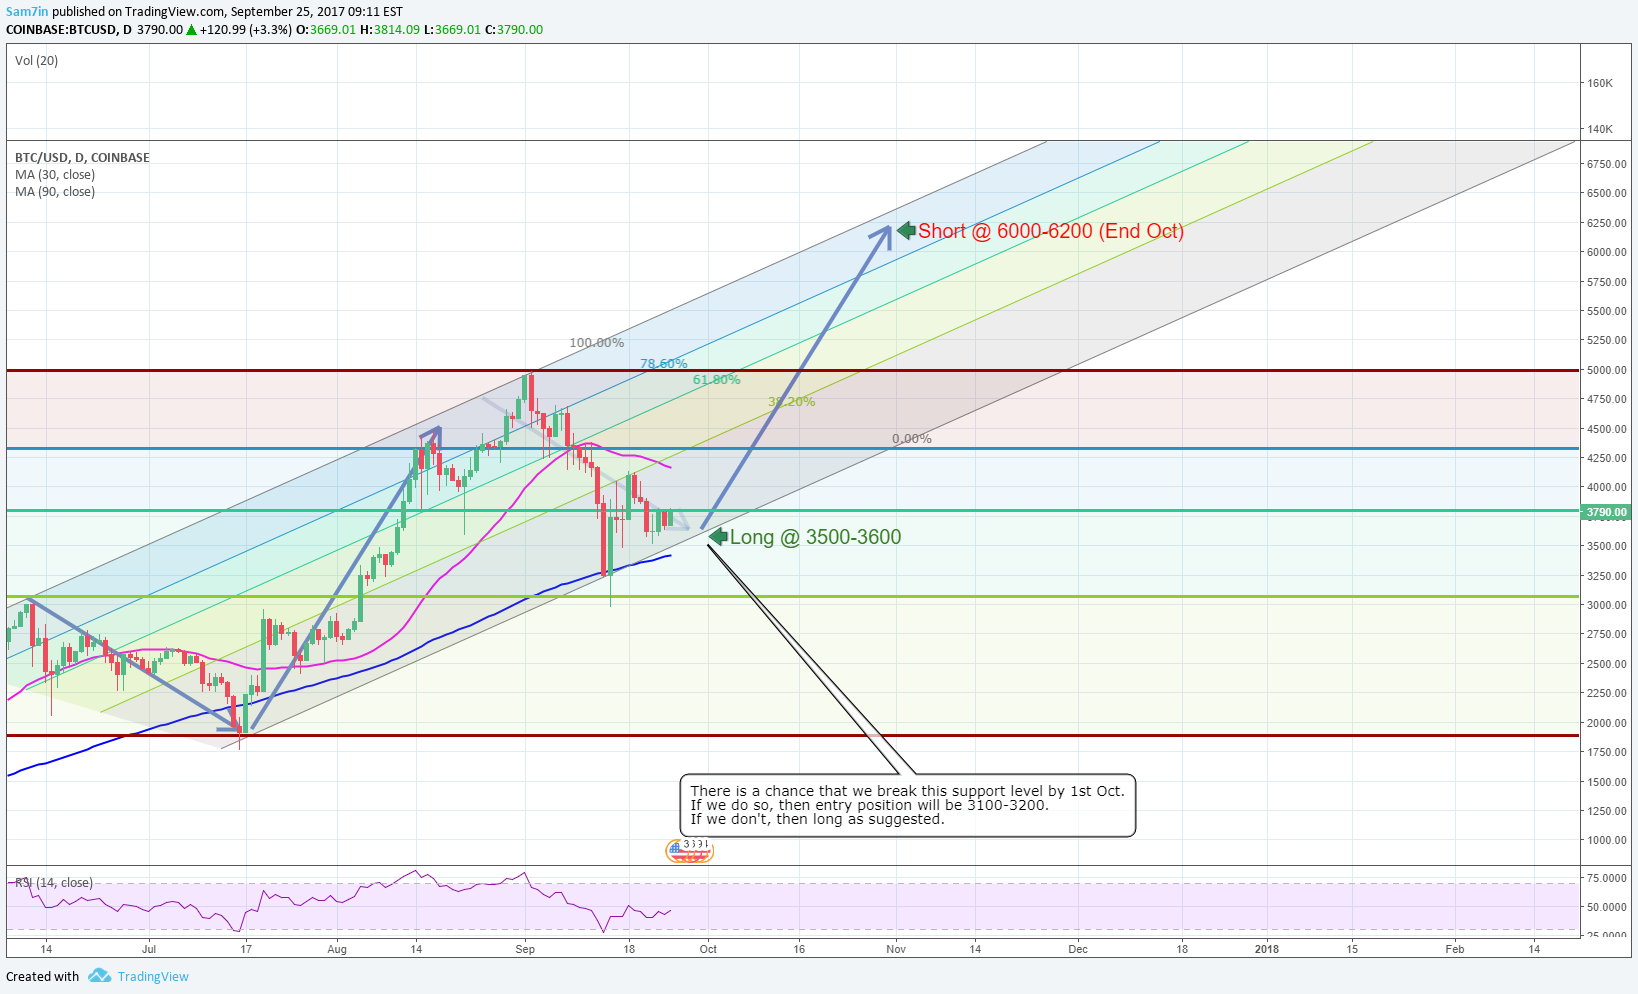 The Bitcoin Price Prediction That Made Me 77 Profit In 30 Days - 